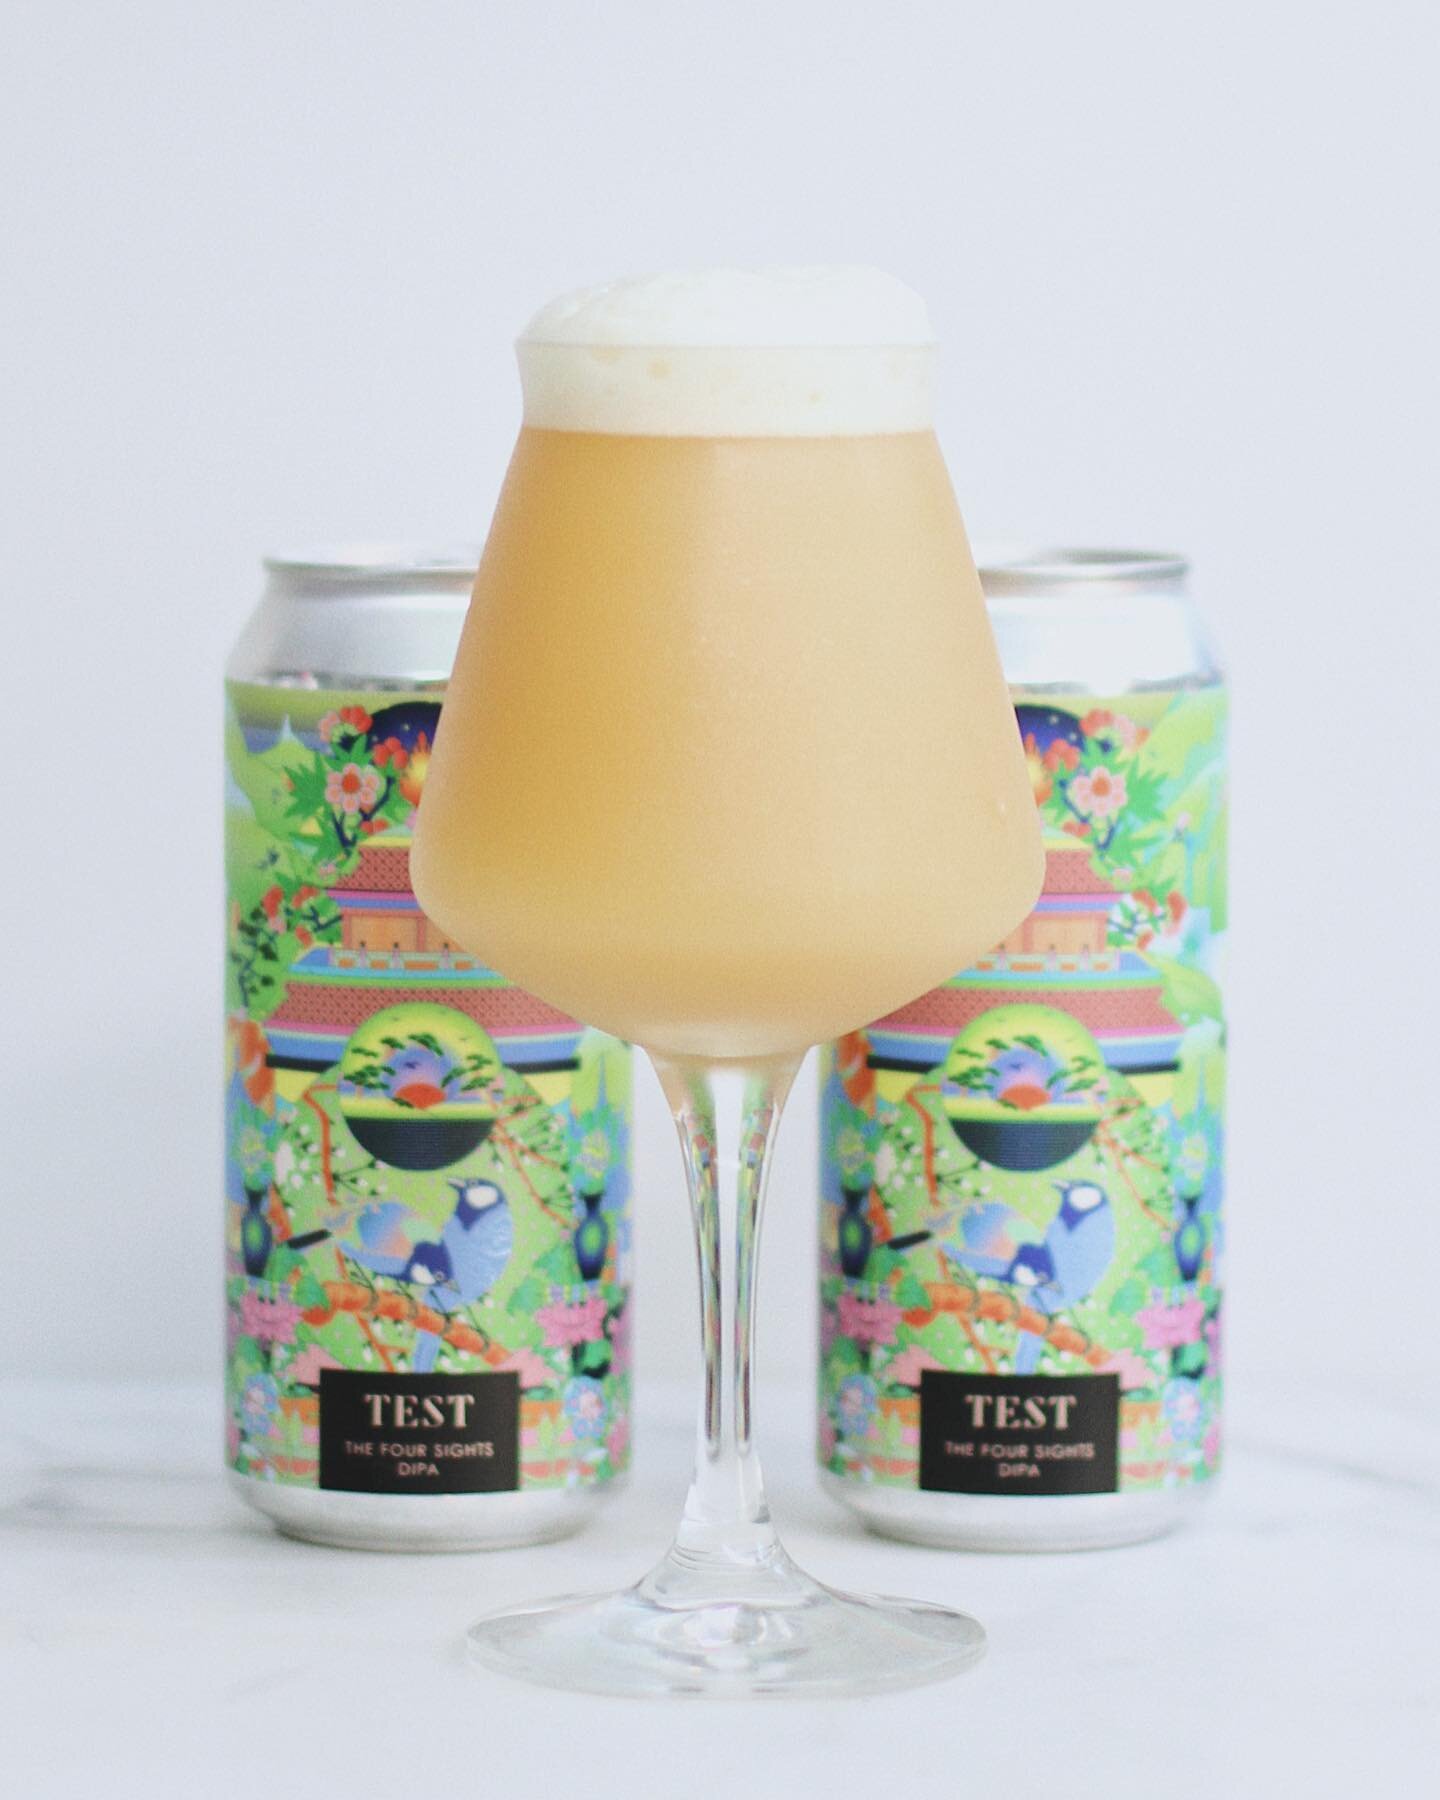 🚨Special Beer Release this weekend with our dear friends @thetestbrewery 

From Test Brewery:
&ldquo;Be able to snag THE FOUR SIGHTS // Double IPA [8%] brewed with barley, wheat and oats / hopped with Citra, Vic Secret and Azacca ($20/4-pack) 

&mda